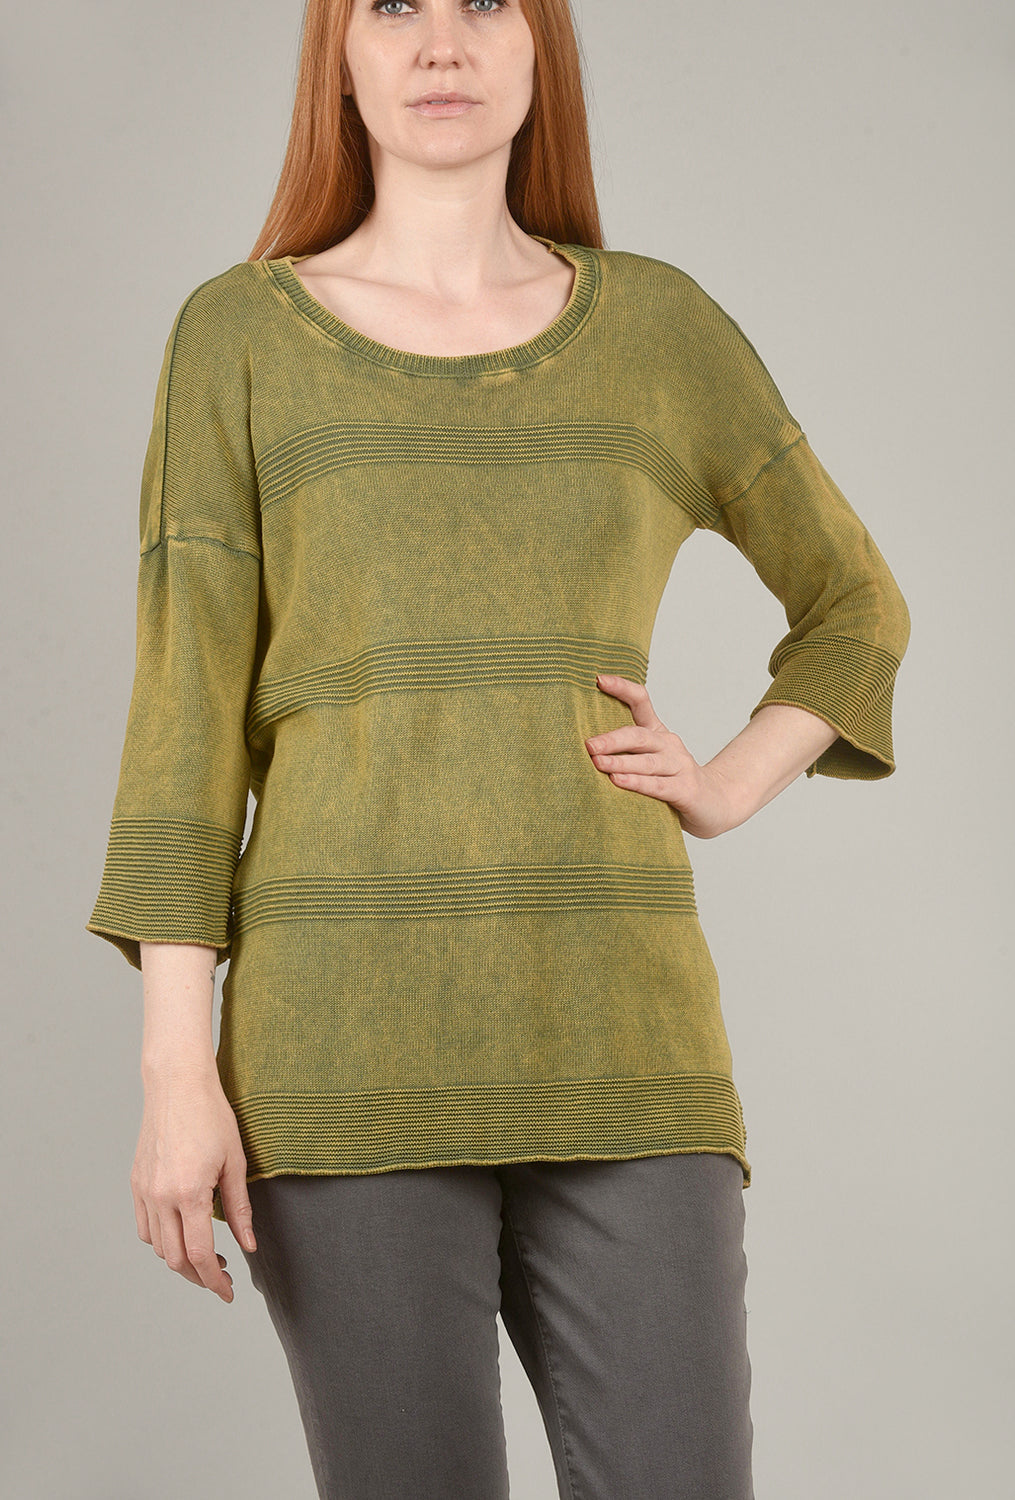 Mineral-Wash Contrast Sweater, Green Olive